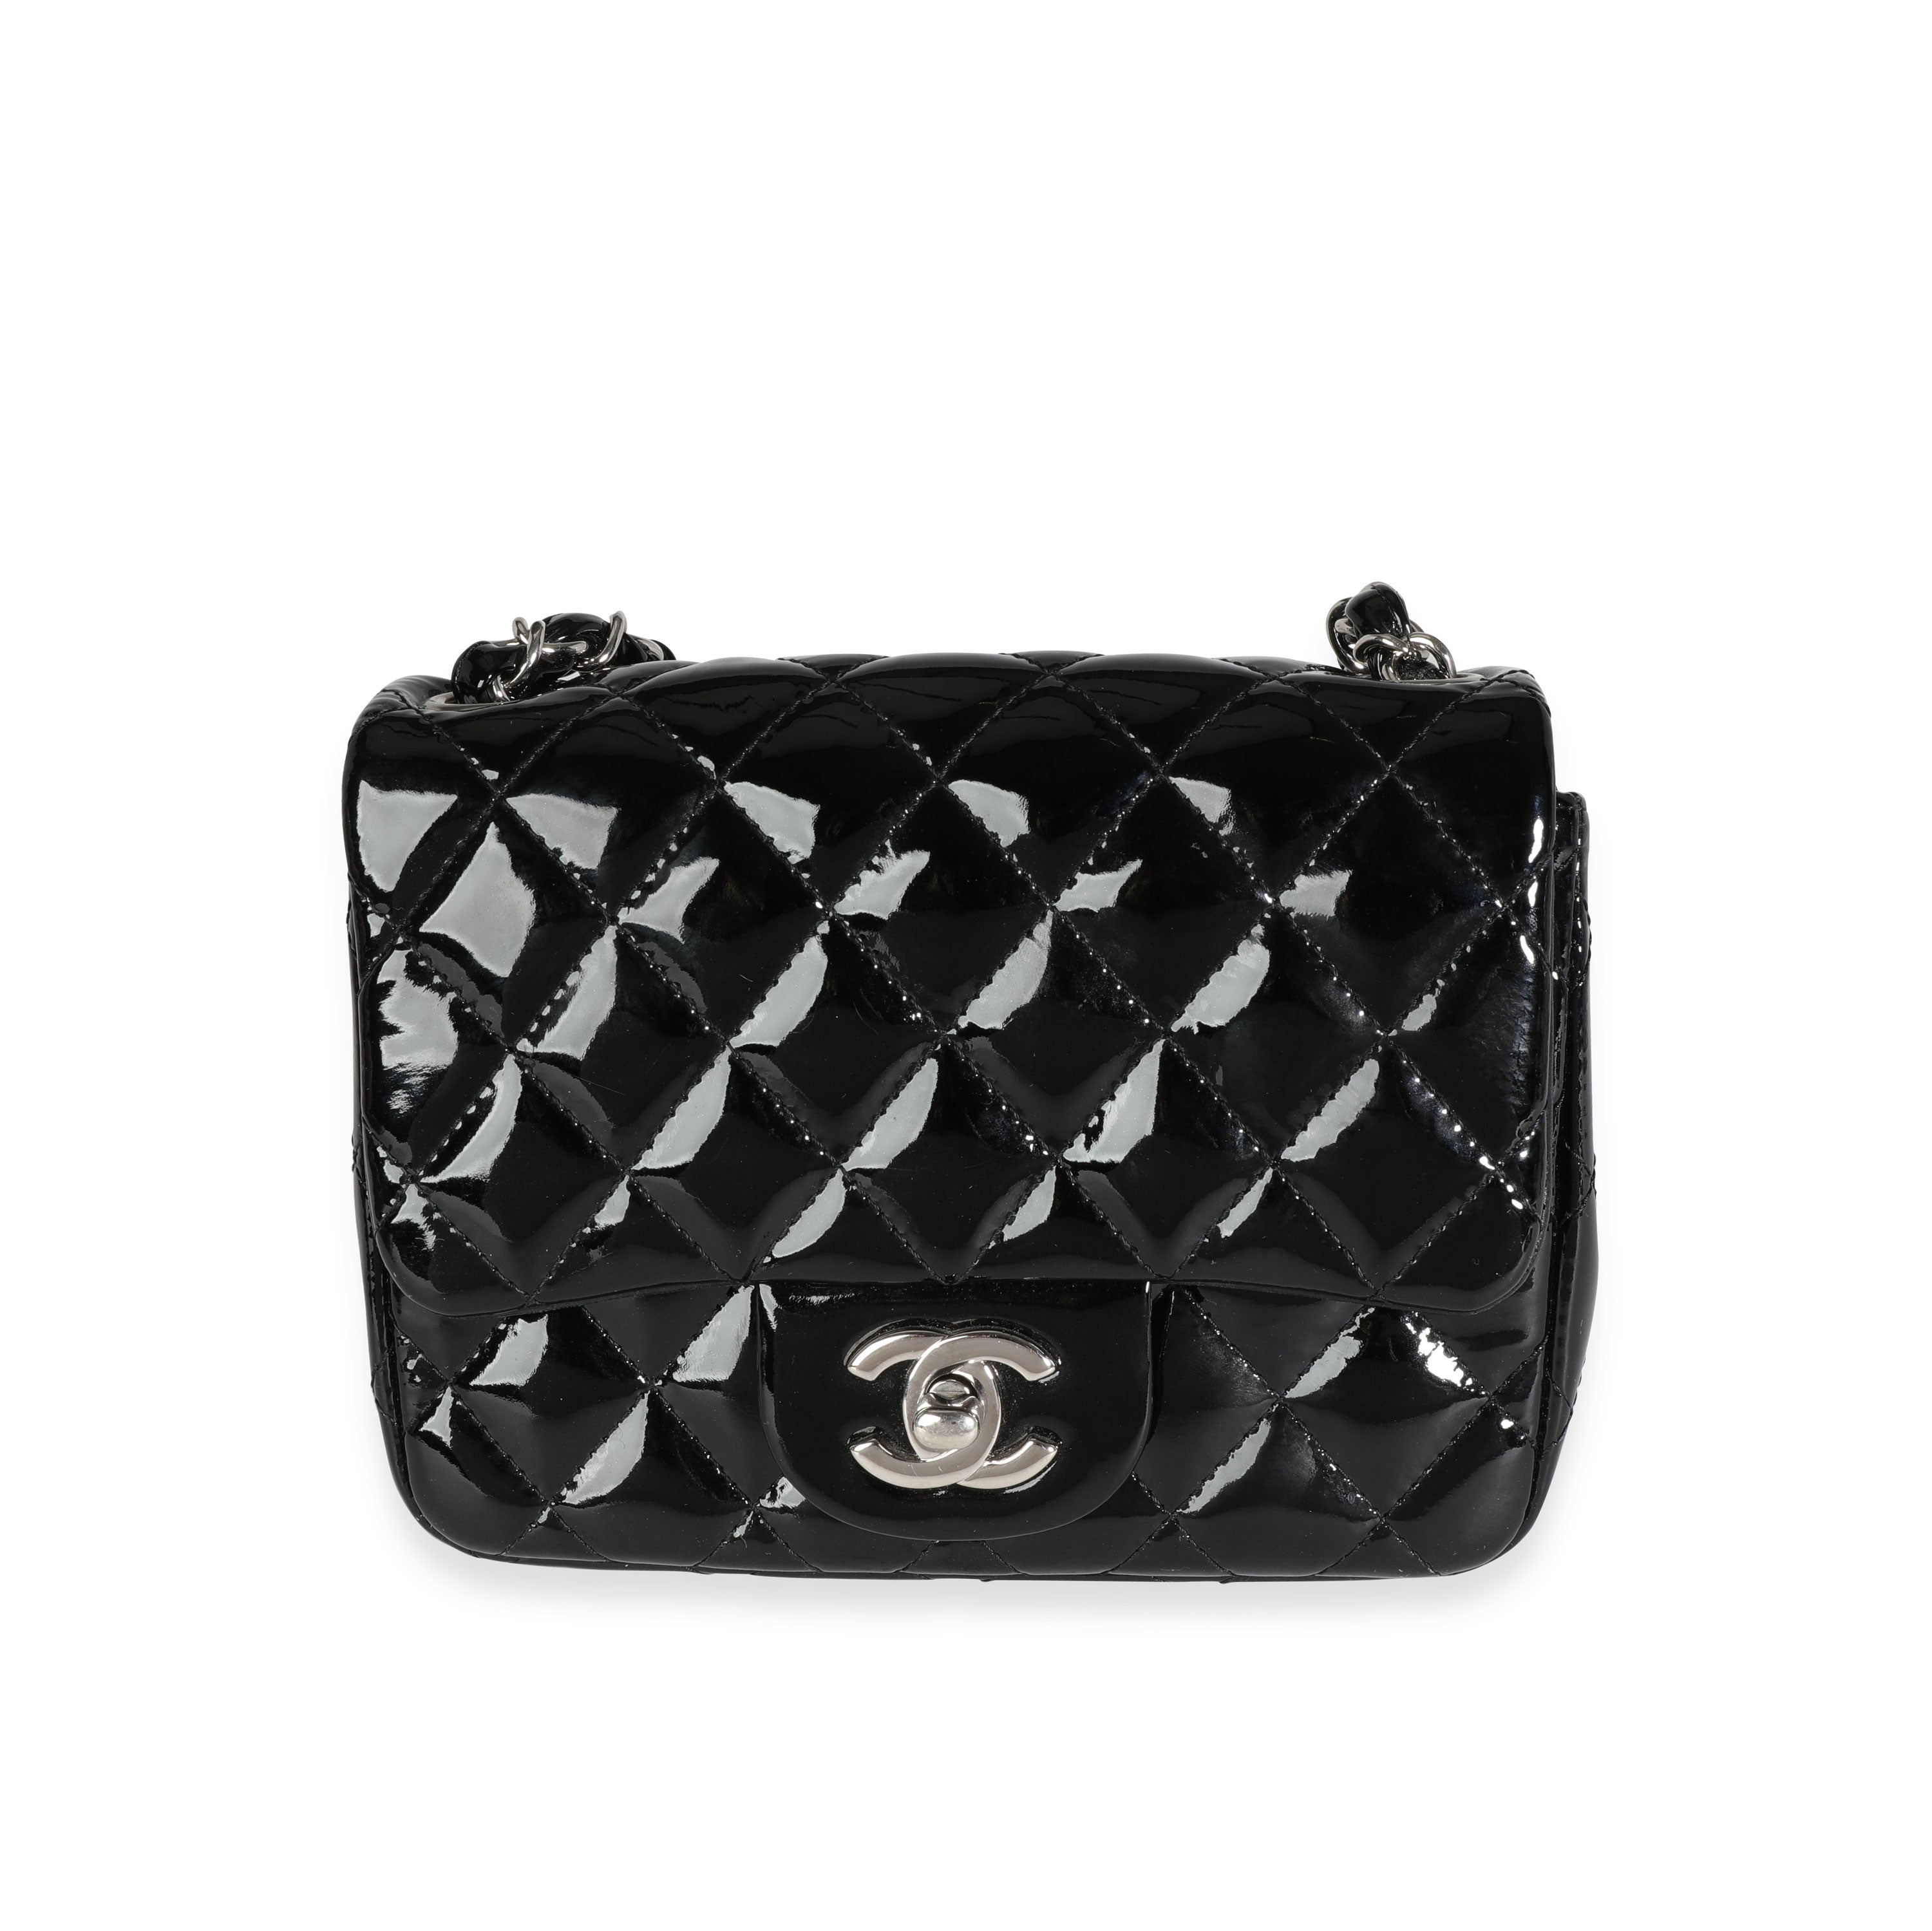 Sold at Auction: Chanel Vintage Black Lambskin Small Classic Flap